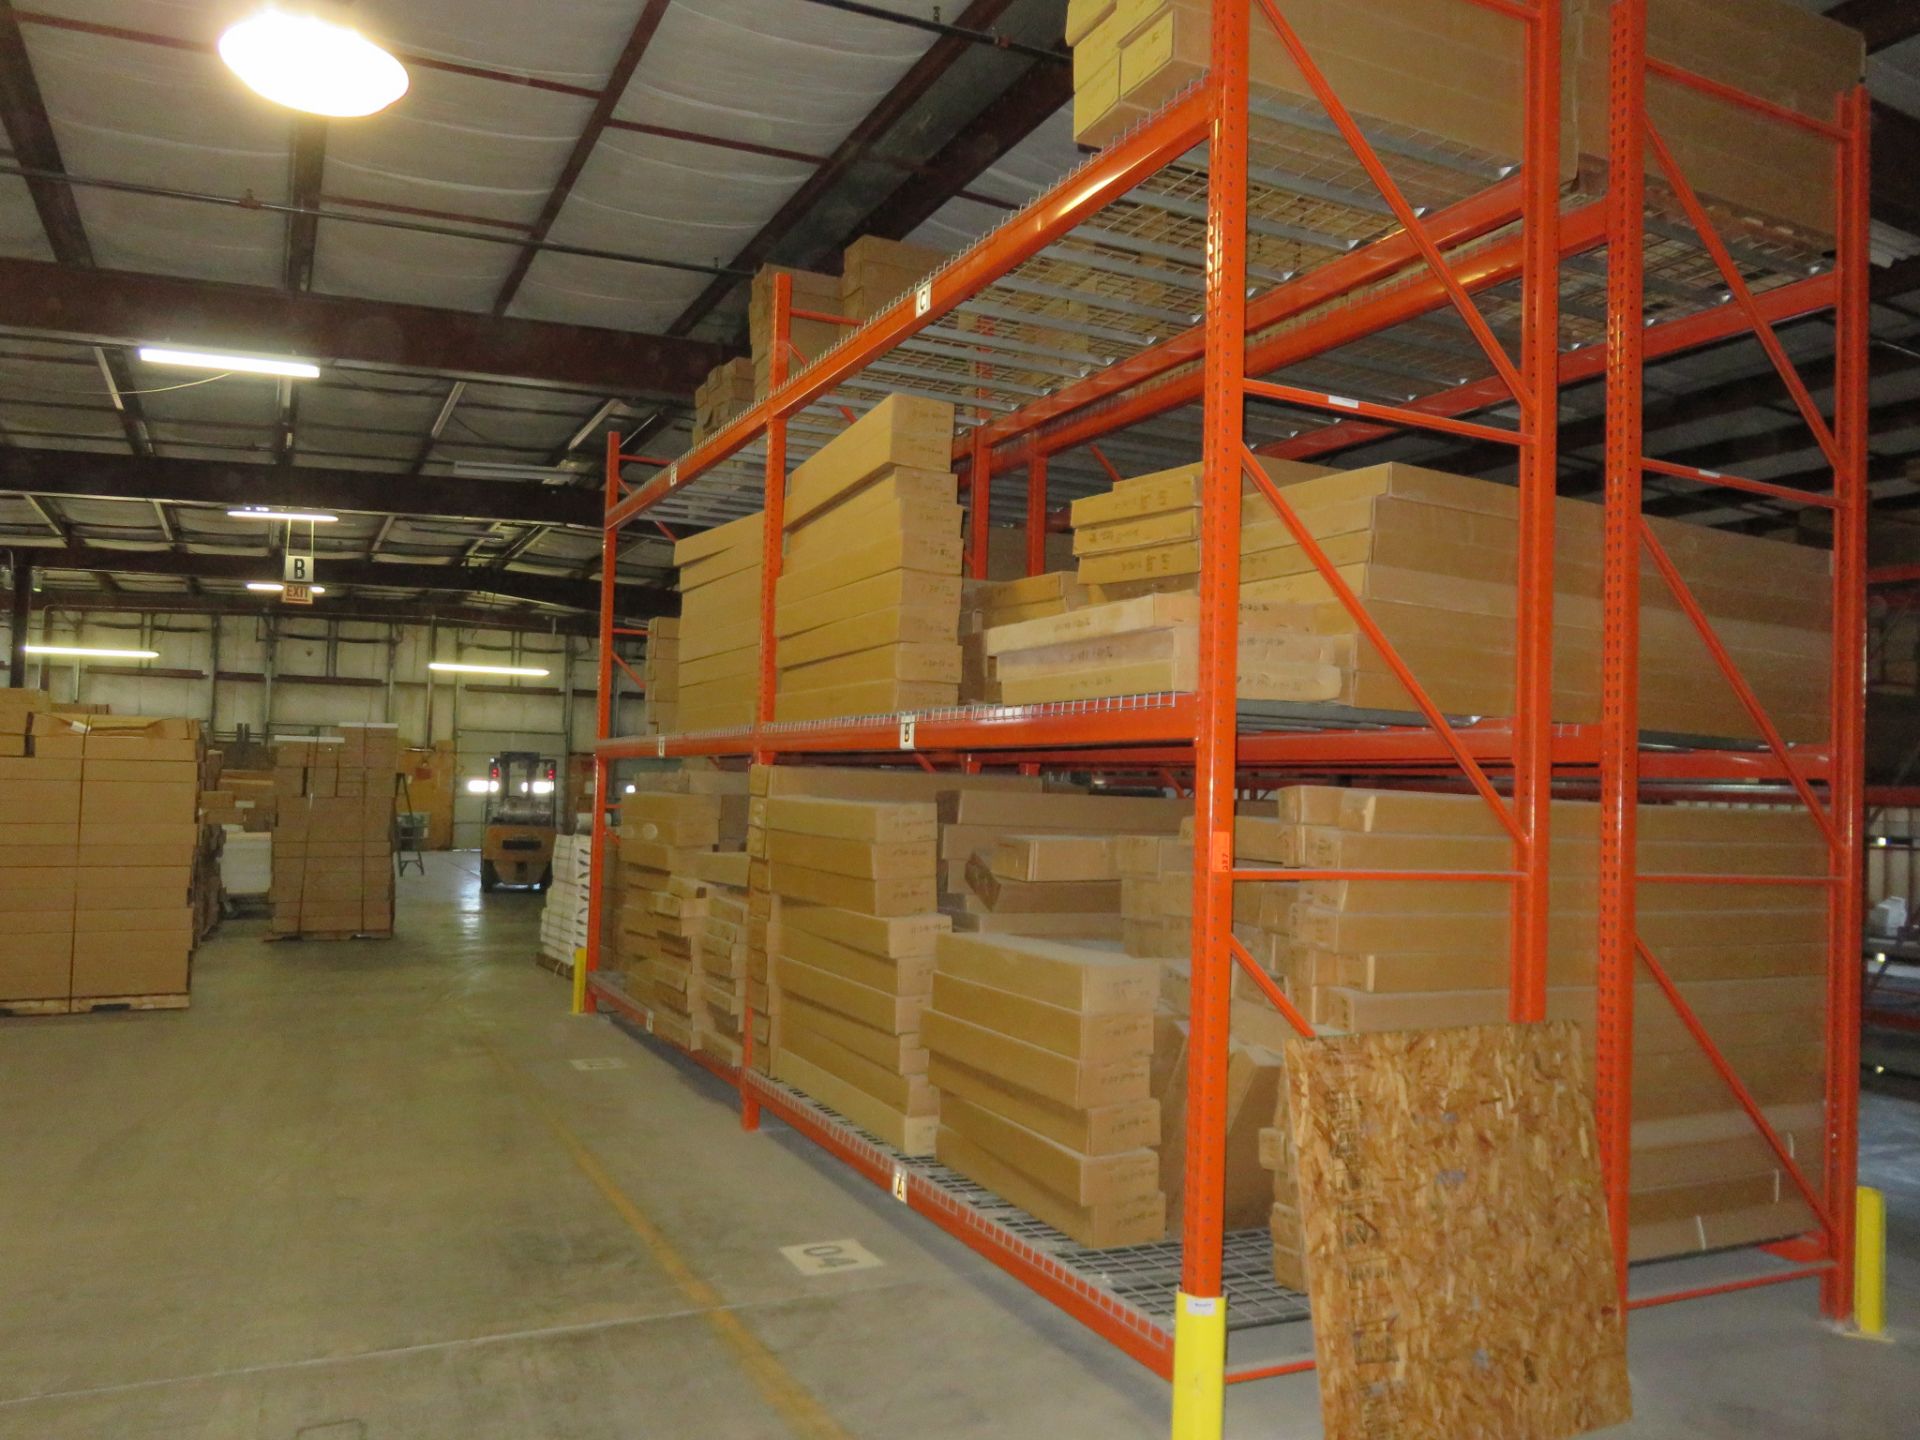 2 Sections 14' Warehouse Pallet Racking approx 12' x 4' x 14'